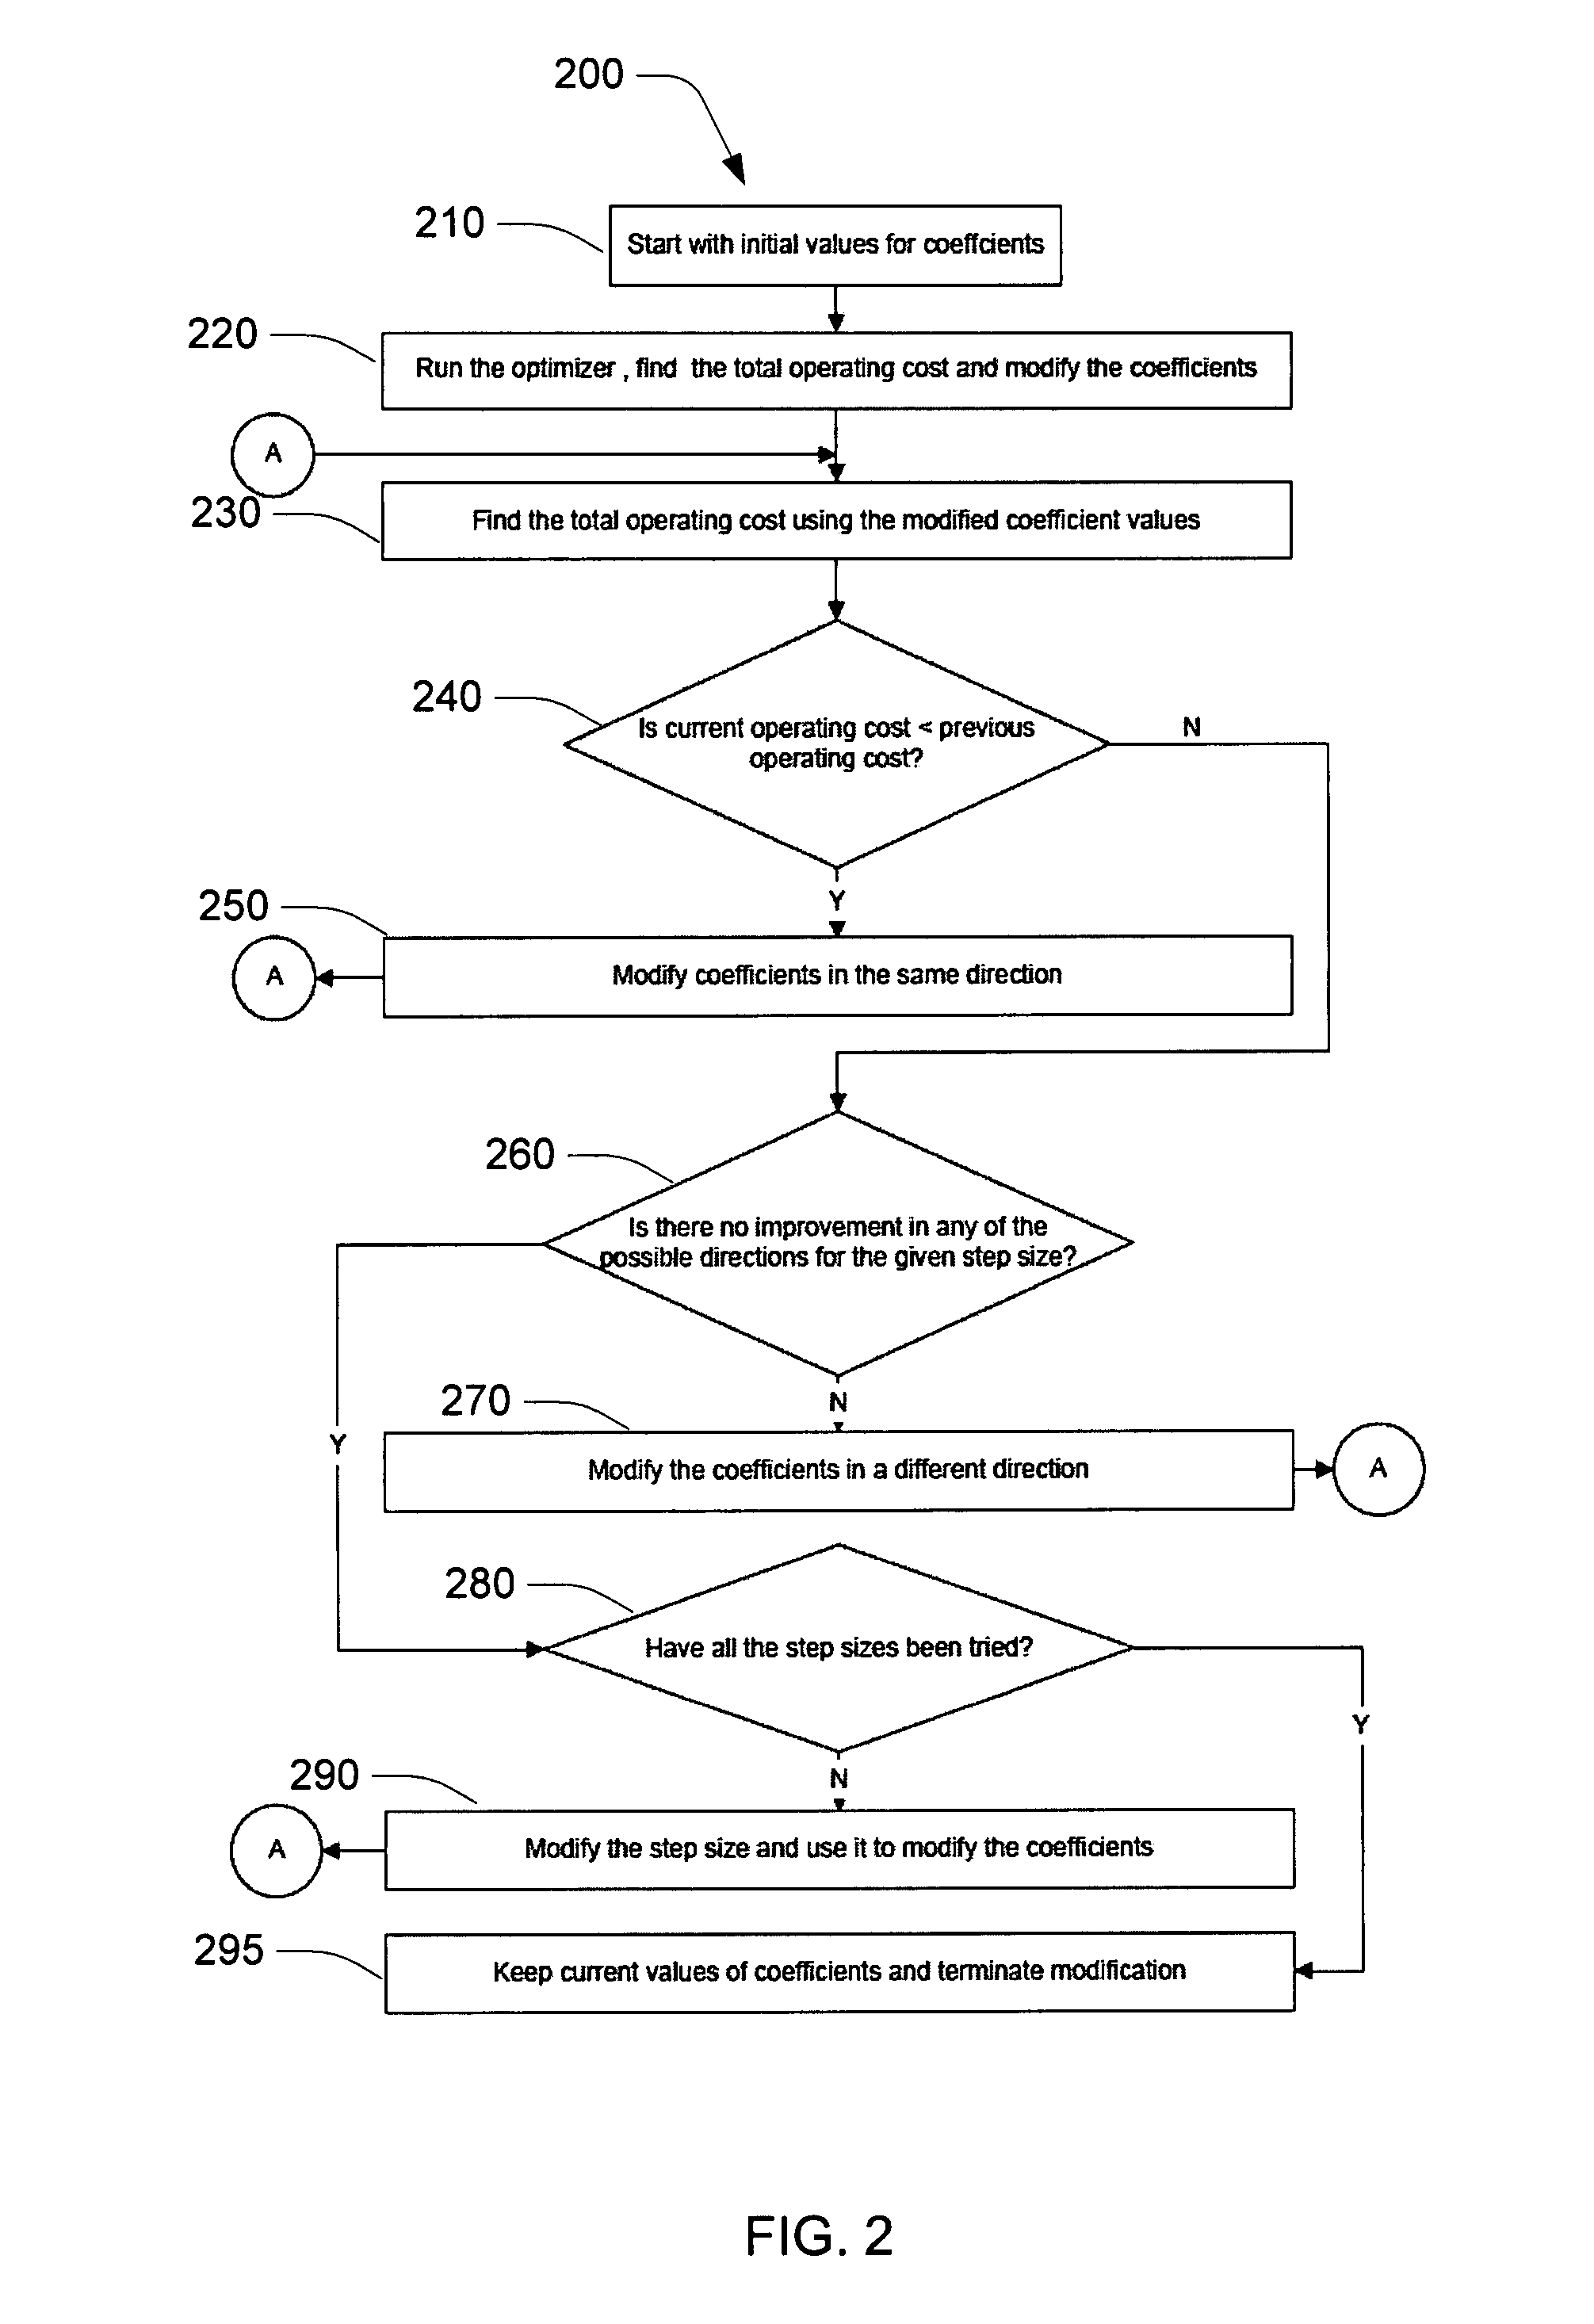 System and method suitable for optimizing linehaul operations